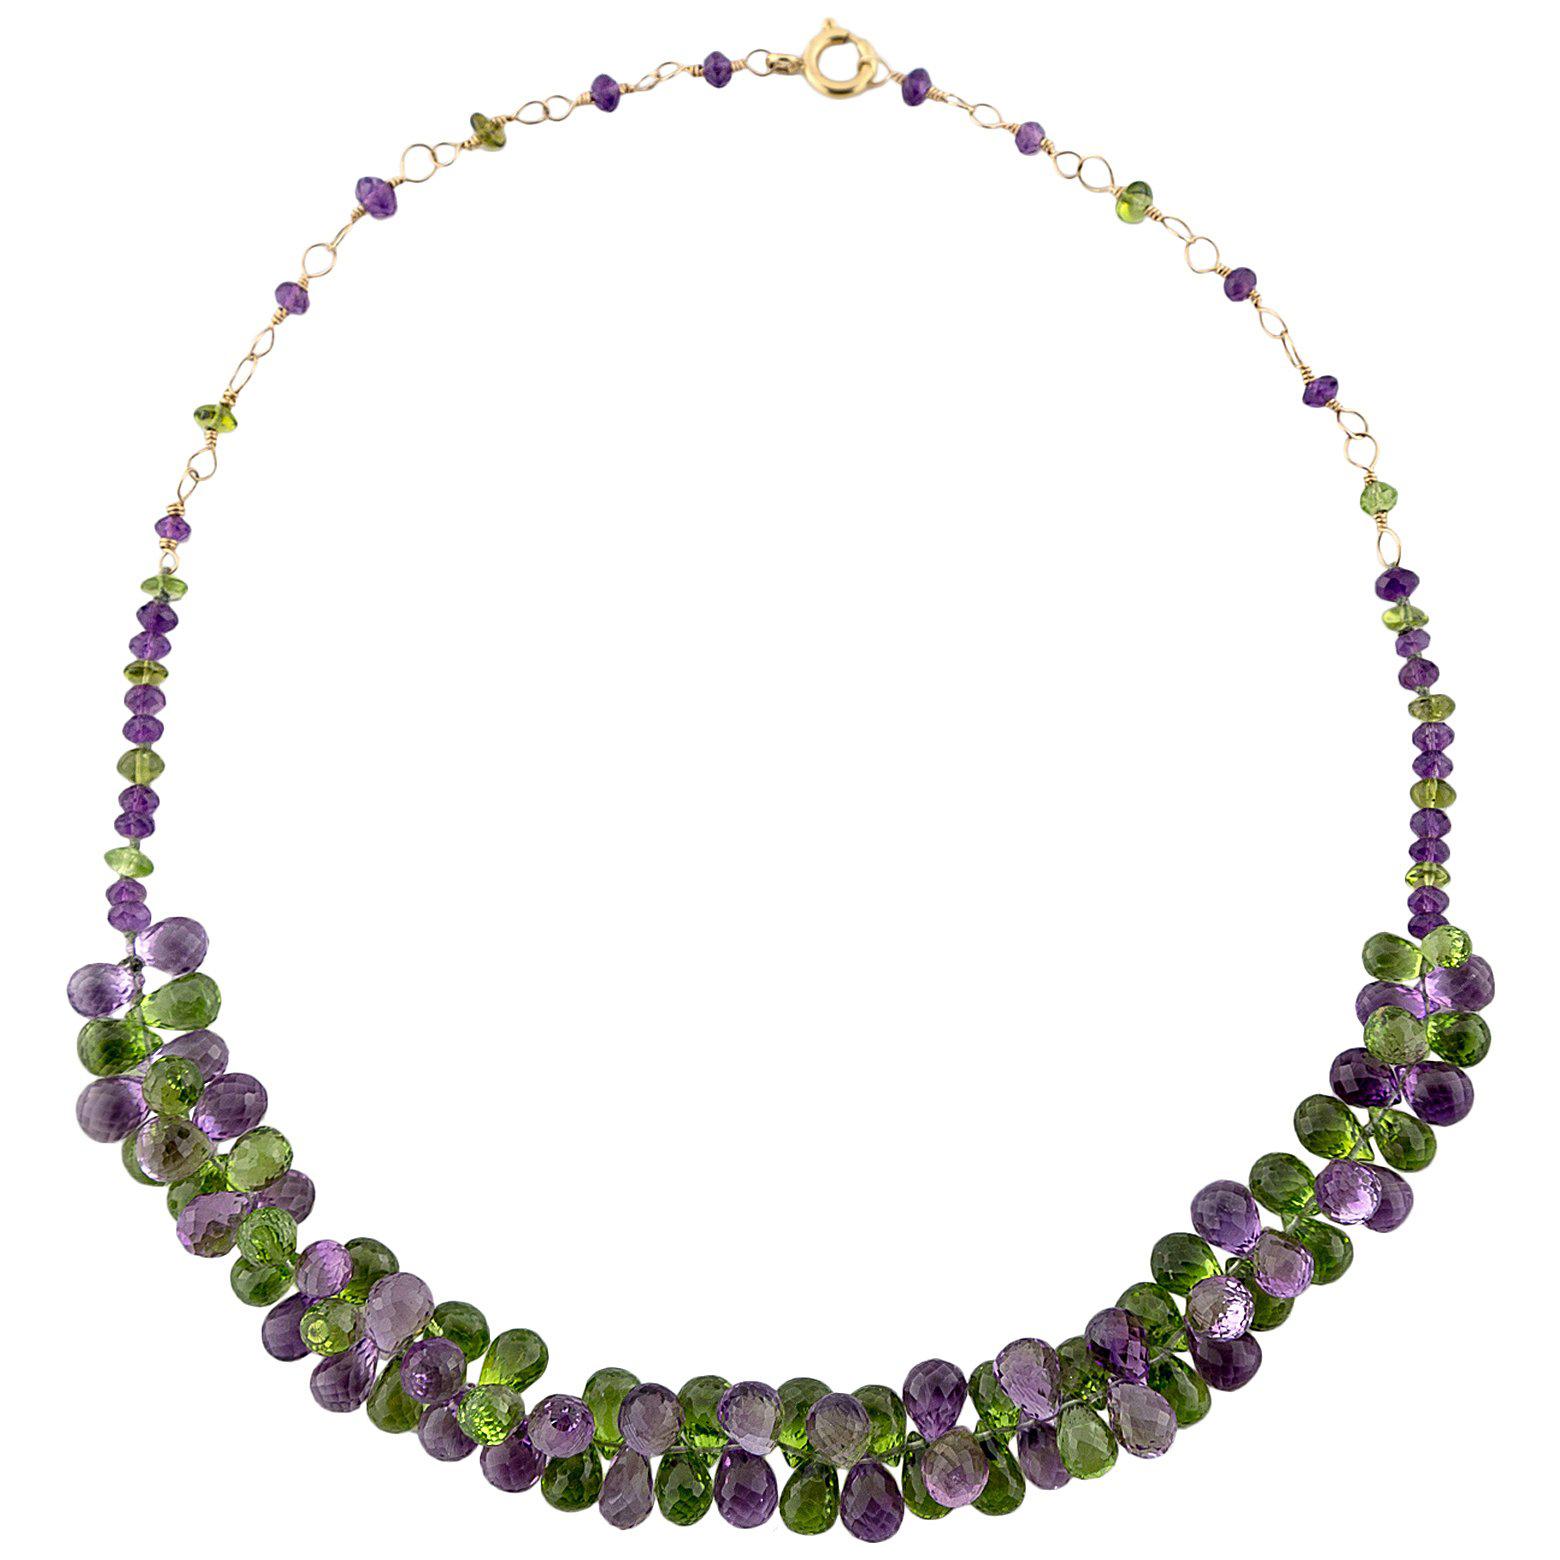 Yellow Gold Filled Necklace with Briolette Amethysts and Briolette Peridots